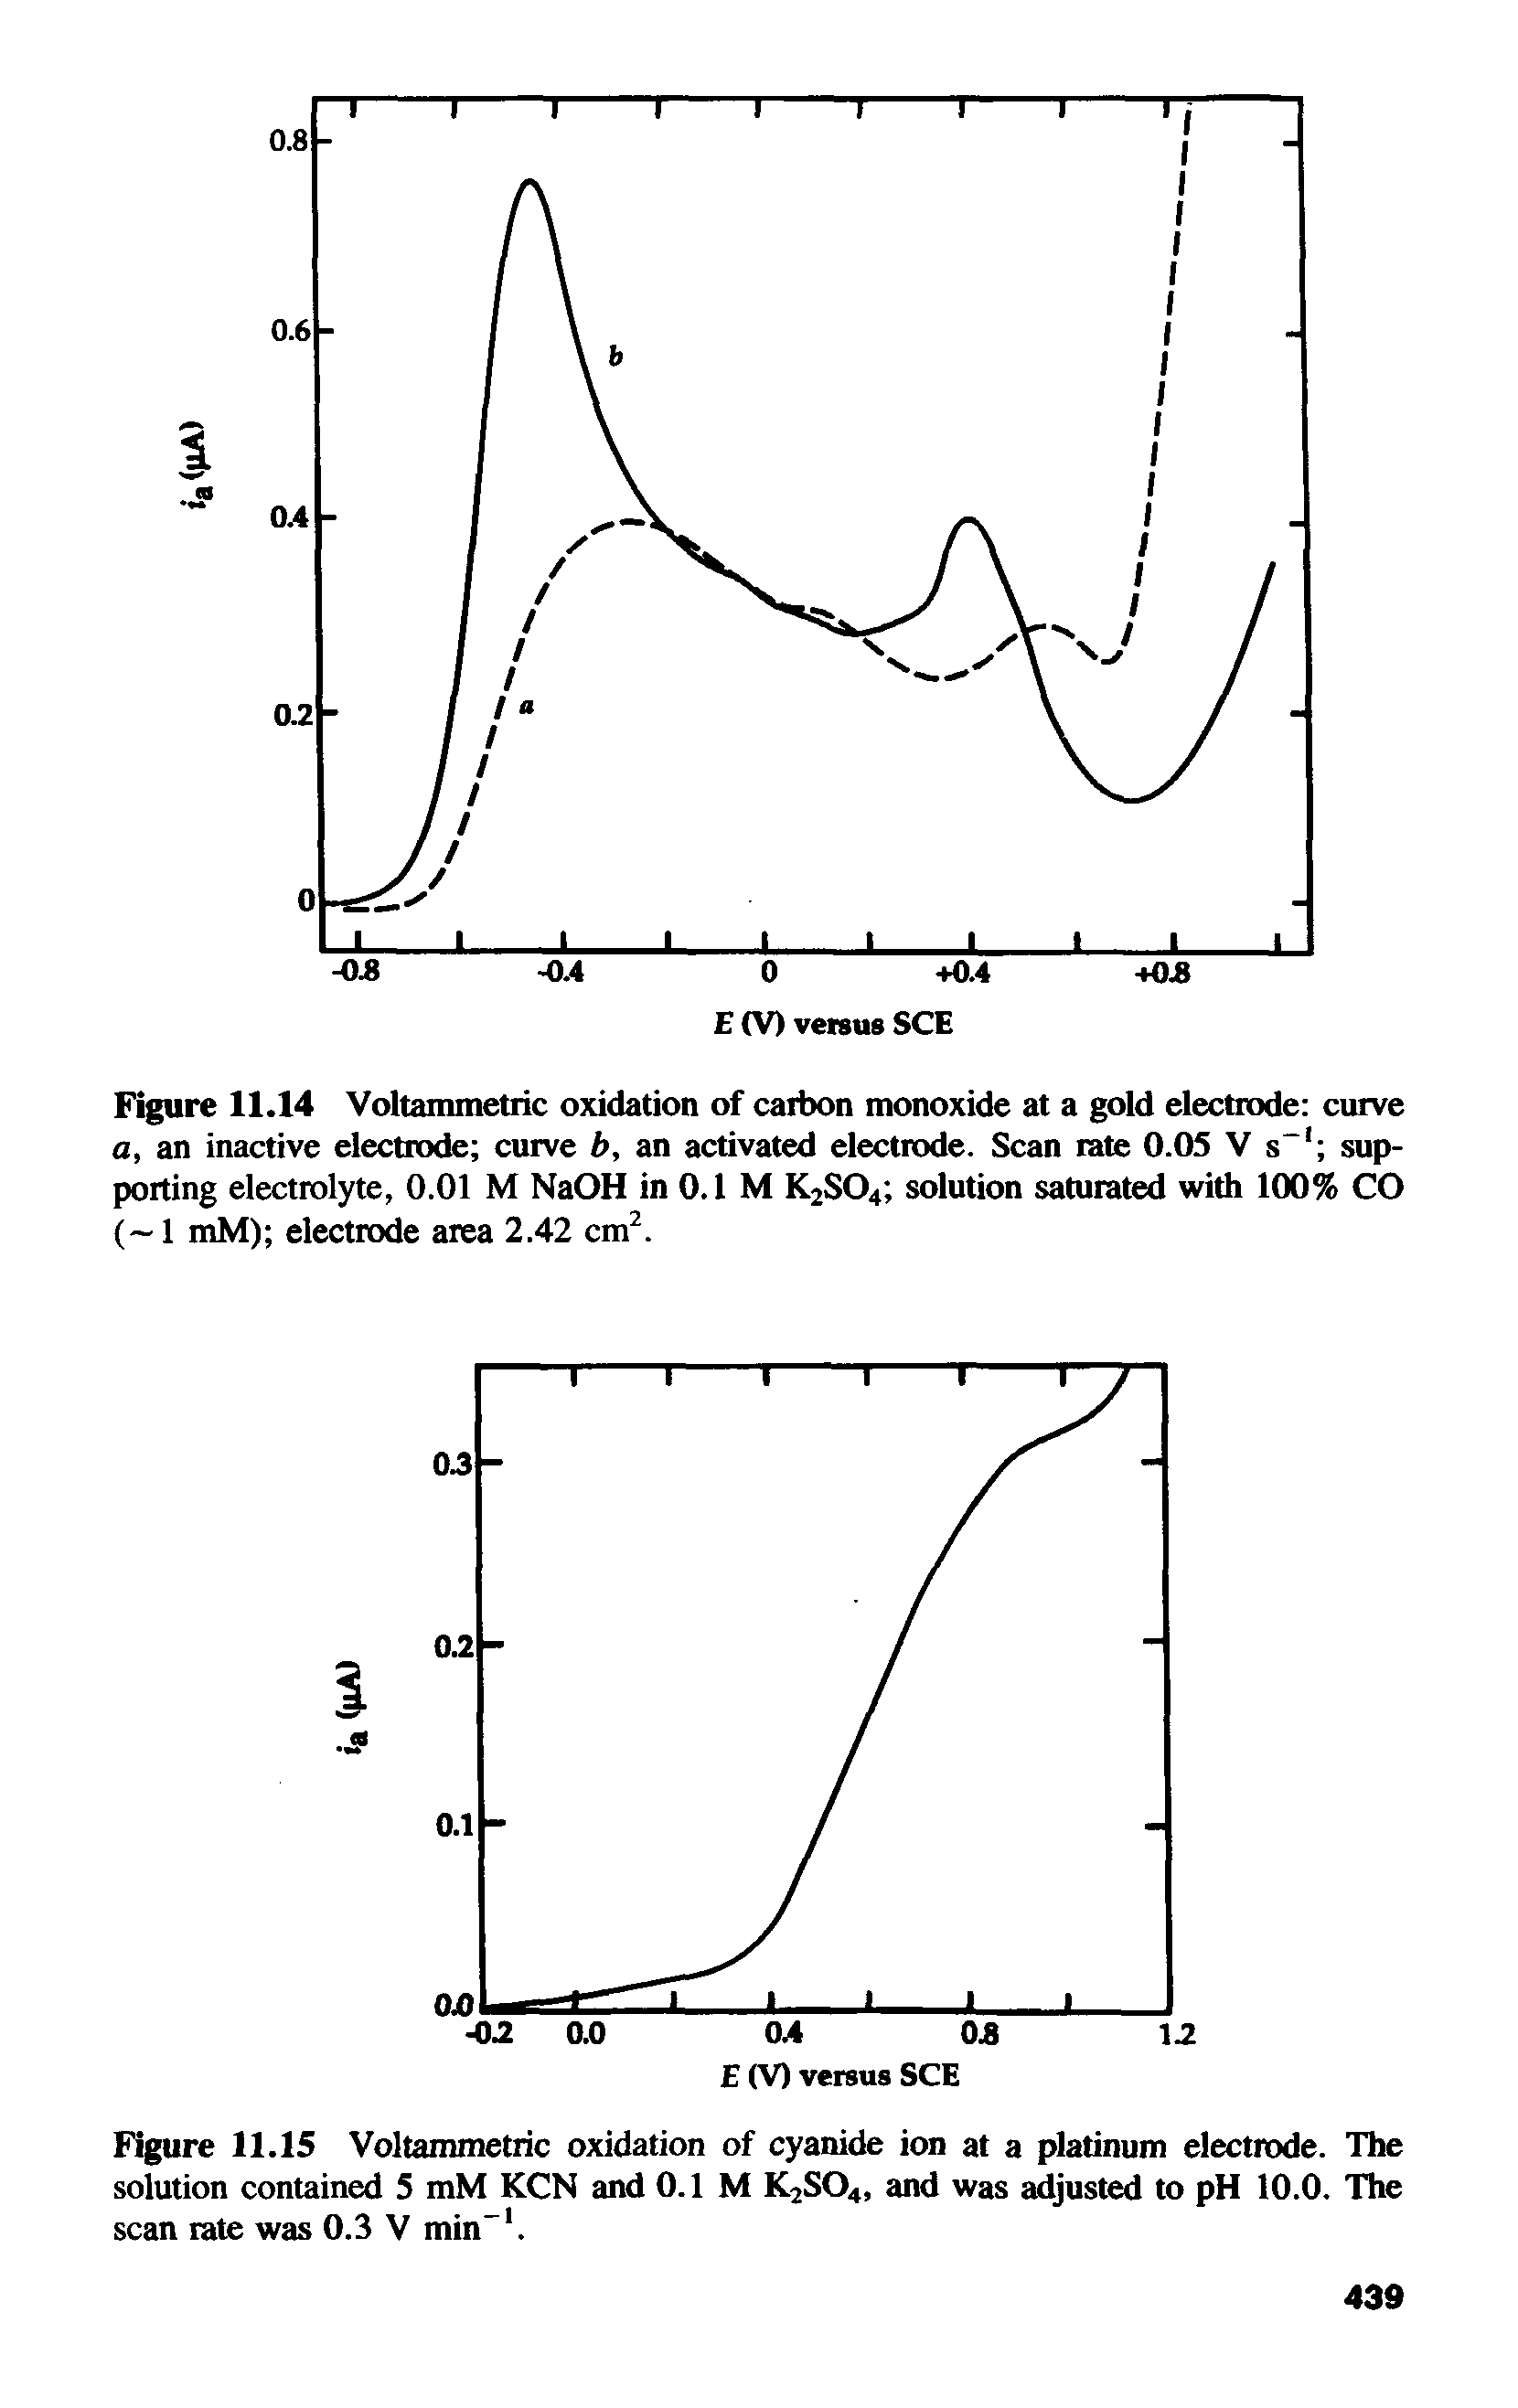 Figure 11.15 Voltammetric oxidation of cyanide ion at a platinum electrode. The solution contained 5 mM KCN and 0.1 M K2S04, and was adjusted to pH 10.0. The scan rate was 0.3 V min-1.